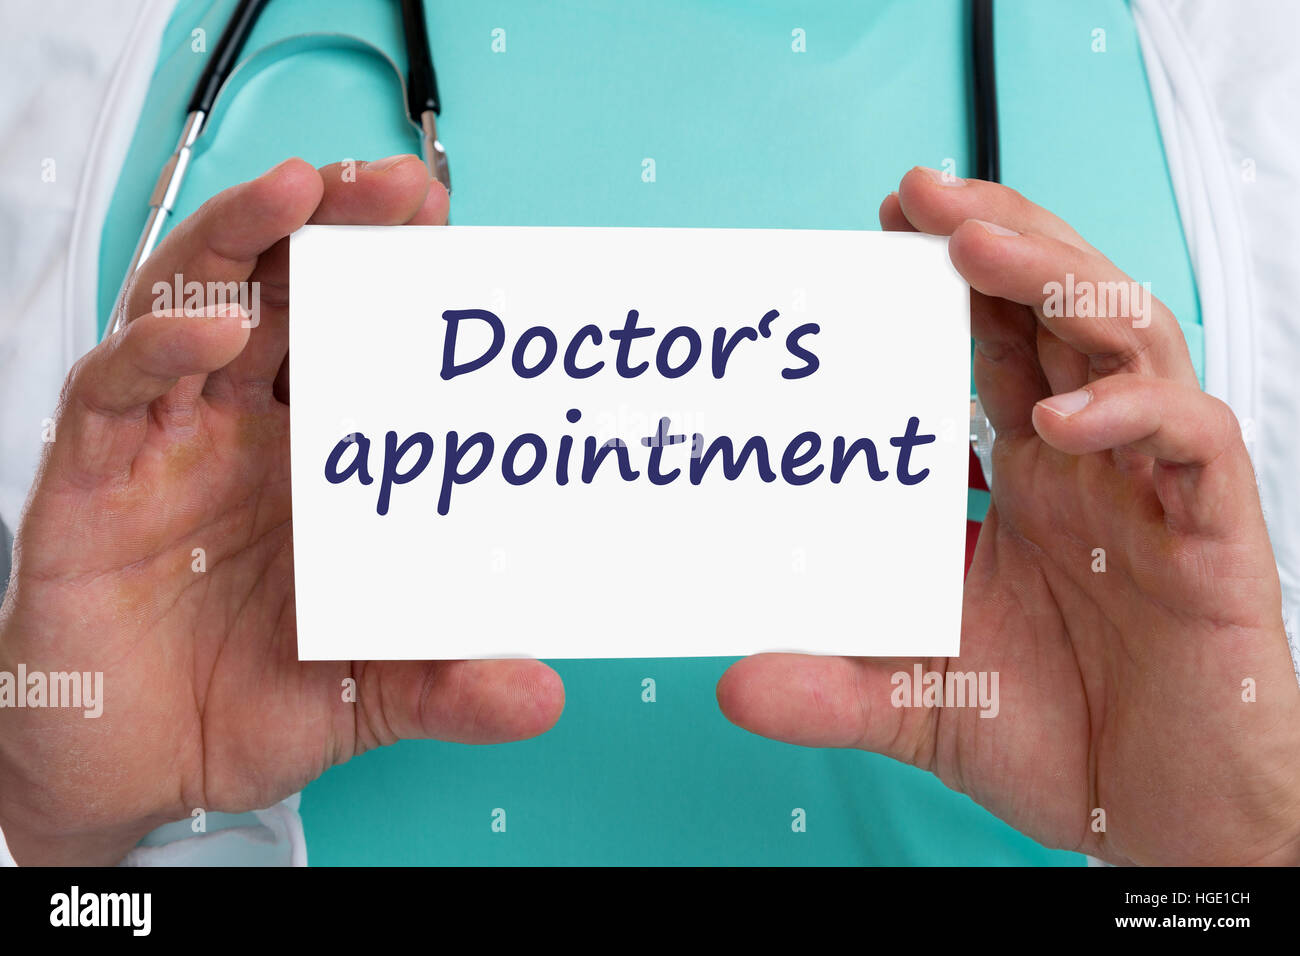 Doctor's medical appointment doctor medicine ill illness healthy health with sign Stock Photo